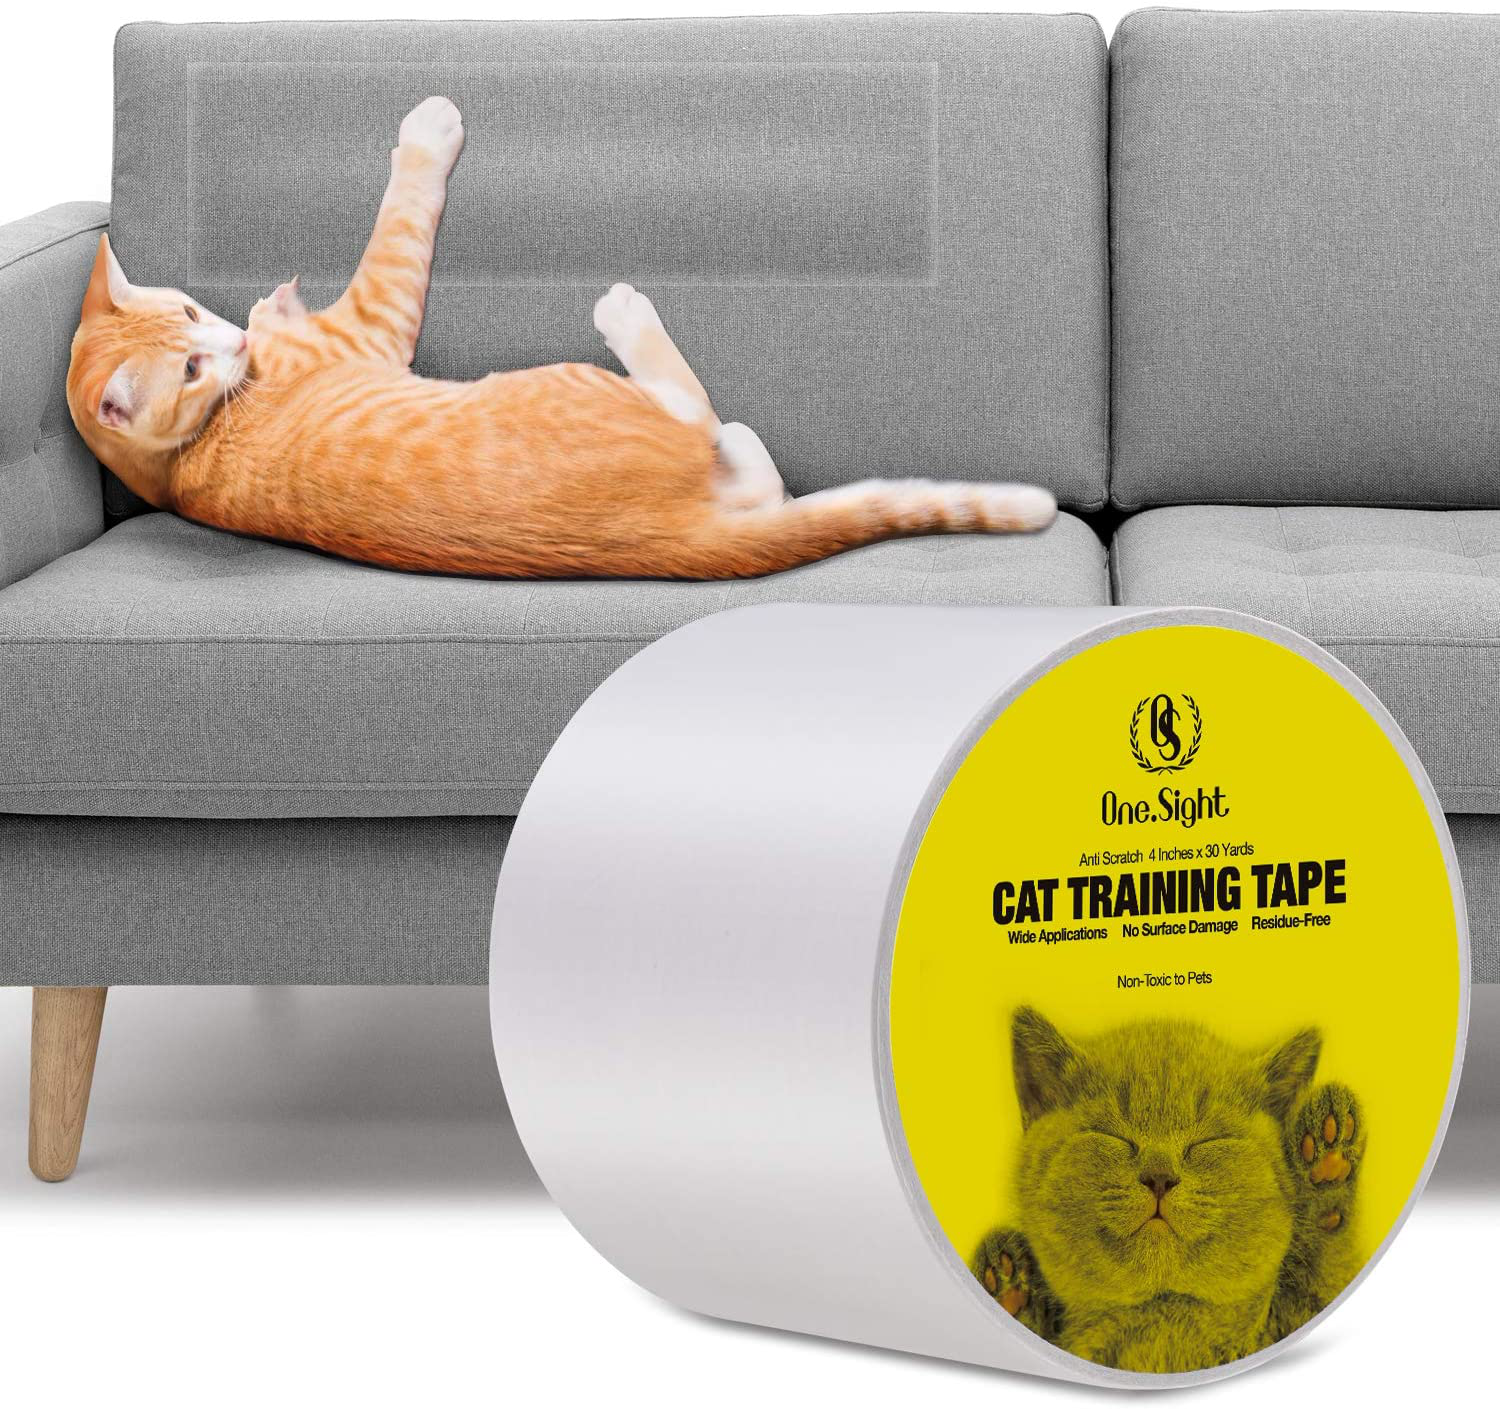 One Sight Cat Scratch Training Deterrent Tape, 4 Inches X 30 Yards(33% Wider) Cat Furniture Protector, Clear Double Sided Cat Couch Protector Cat Sticky Paws Tape for Furniture, Cat Anti-Scratch Pad